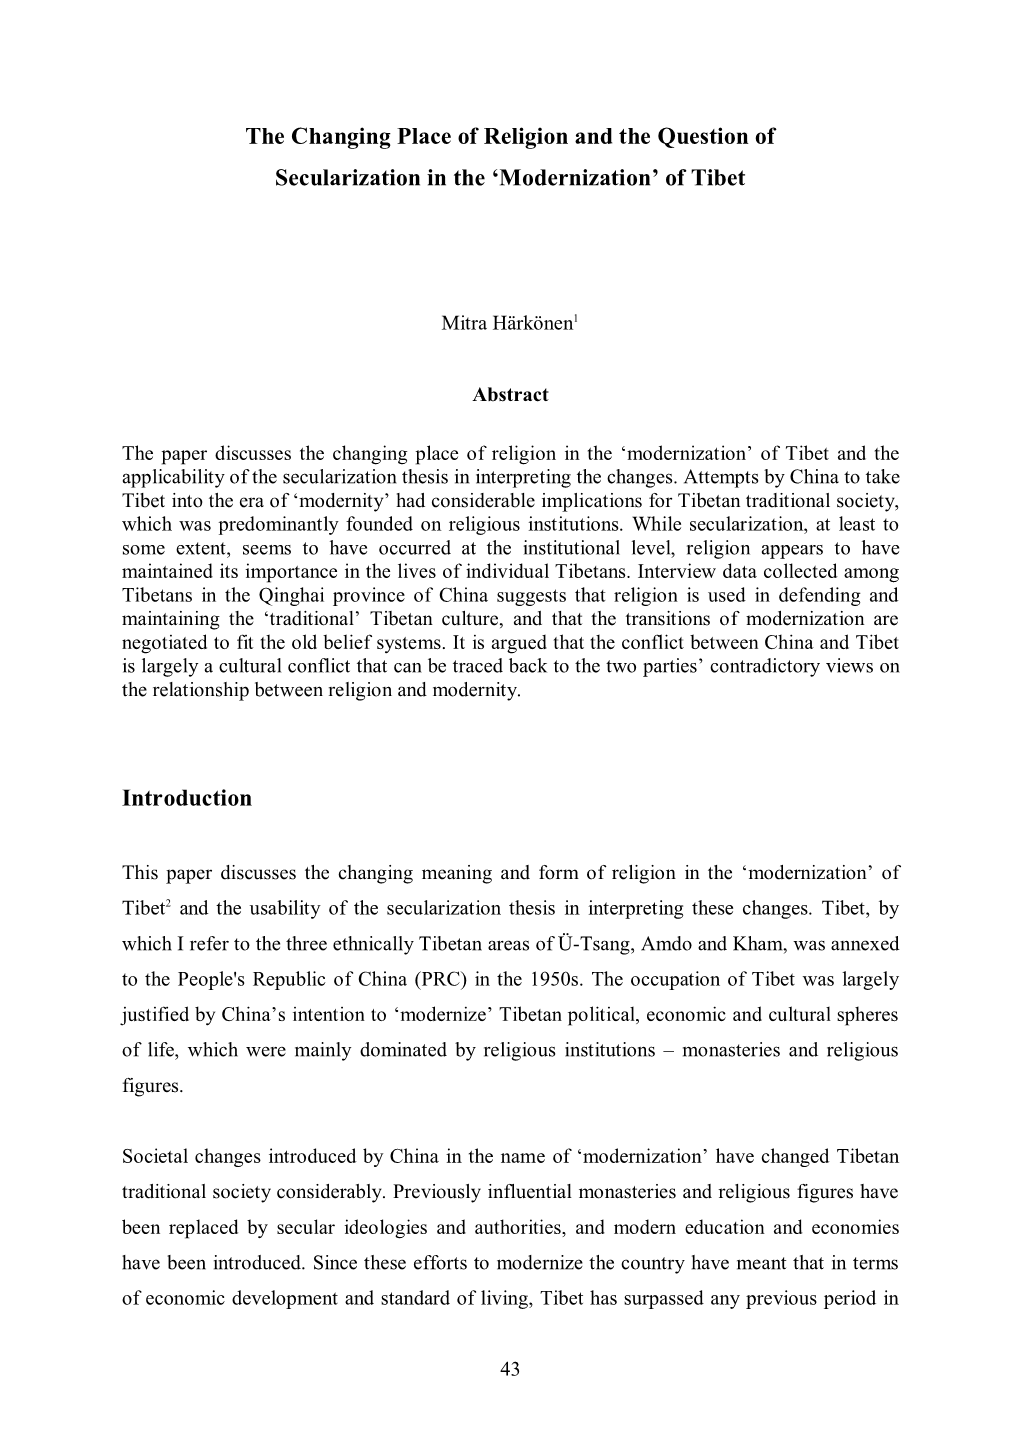 The Changing Place of Religion and the Question of Secularization in the 'Modernization' of Tibet Introduction